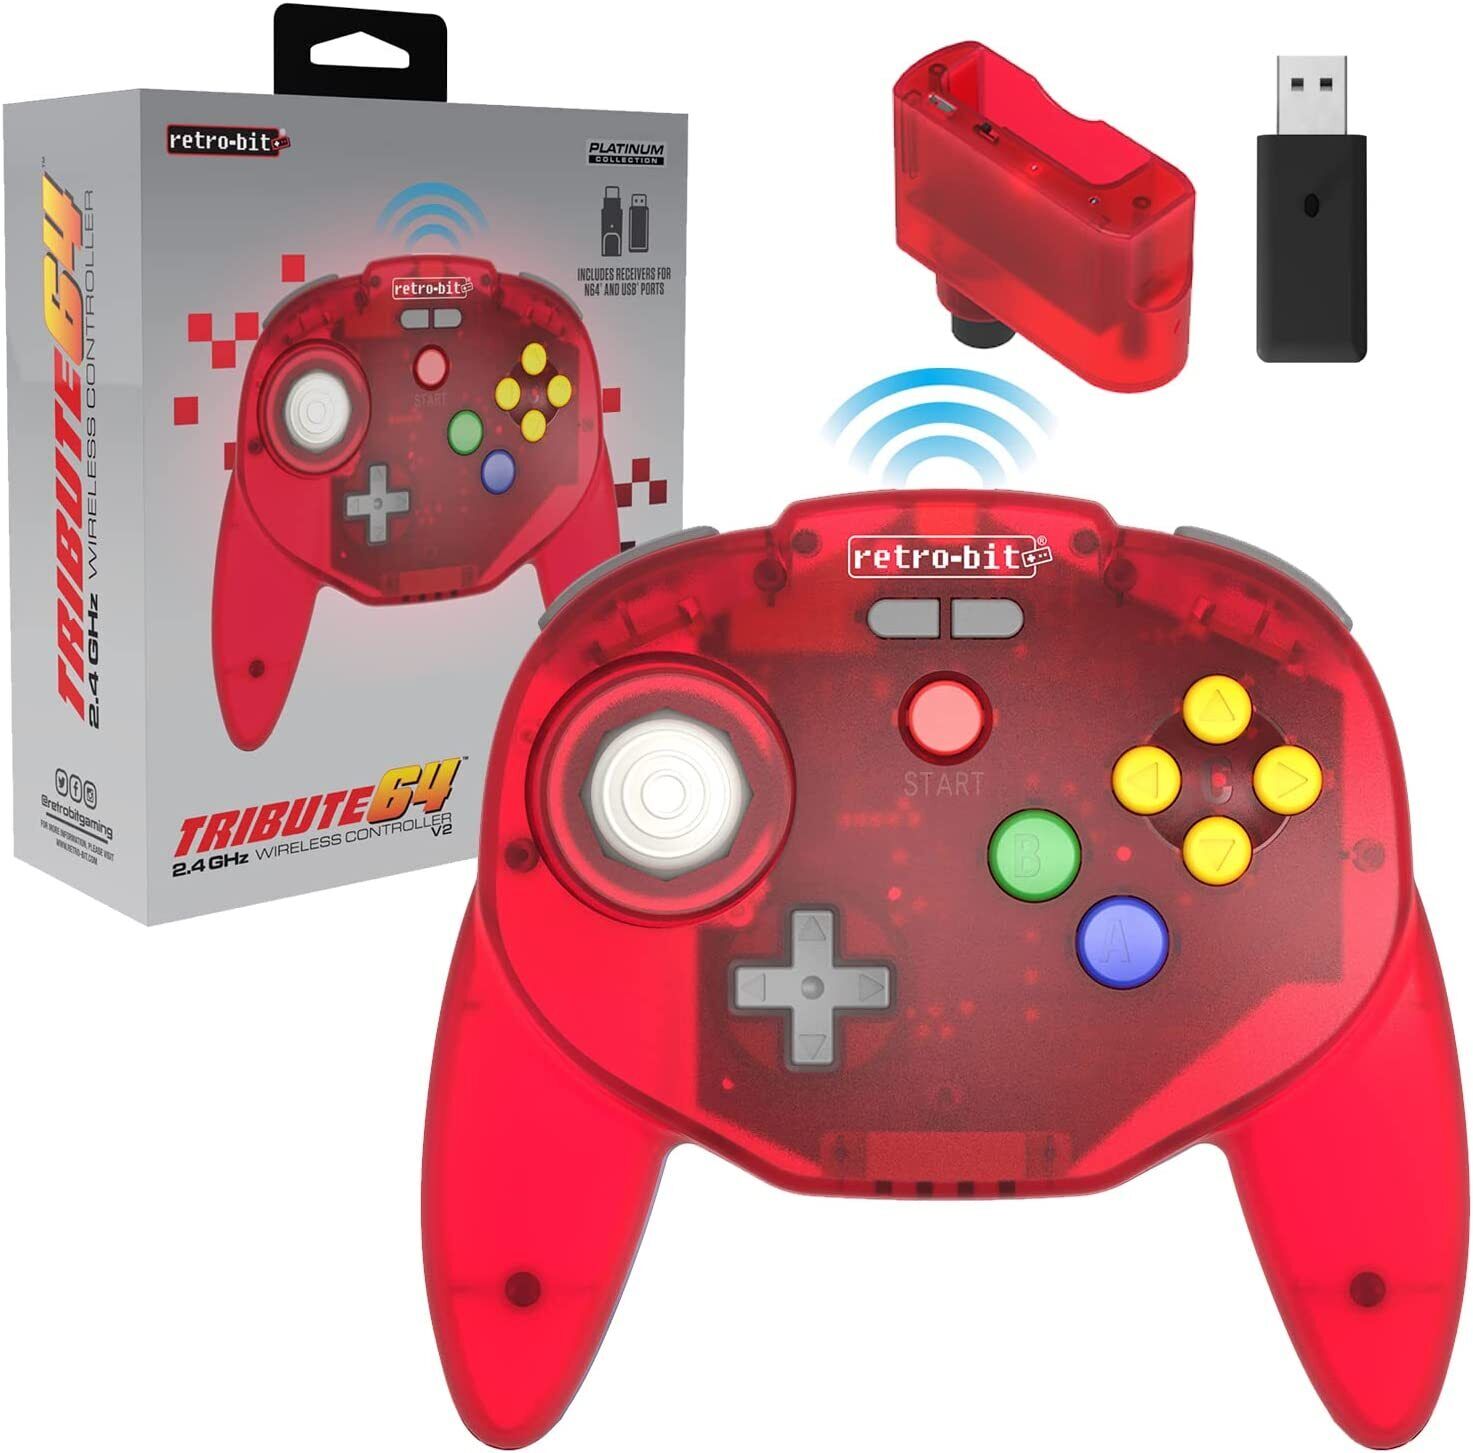 Retro-Bit Tribute 64 2.4ghz wireless controller Red Gamesellers.nl